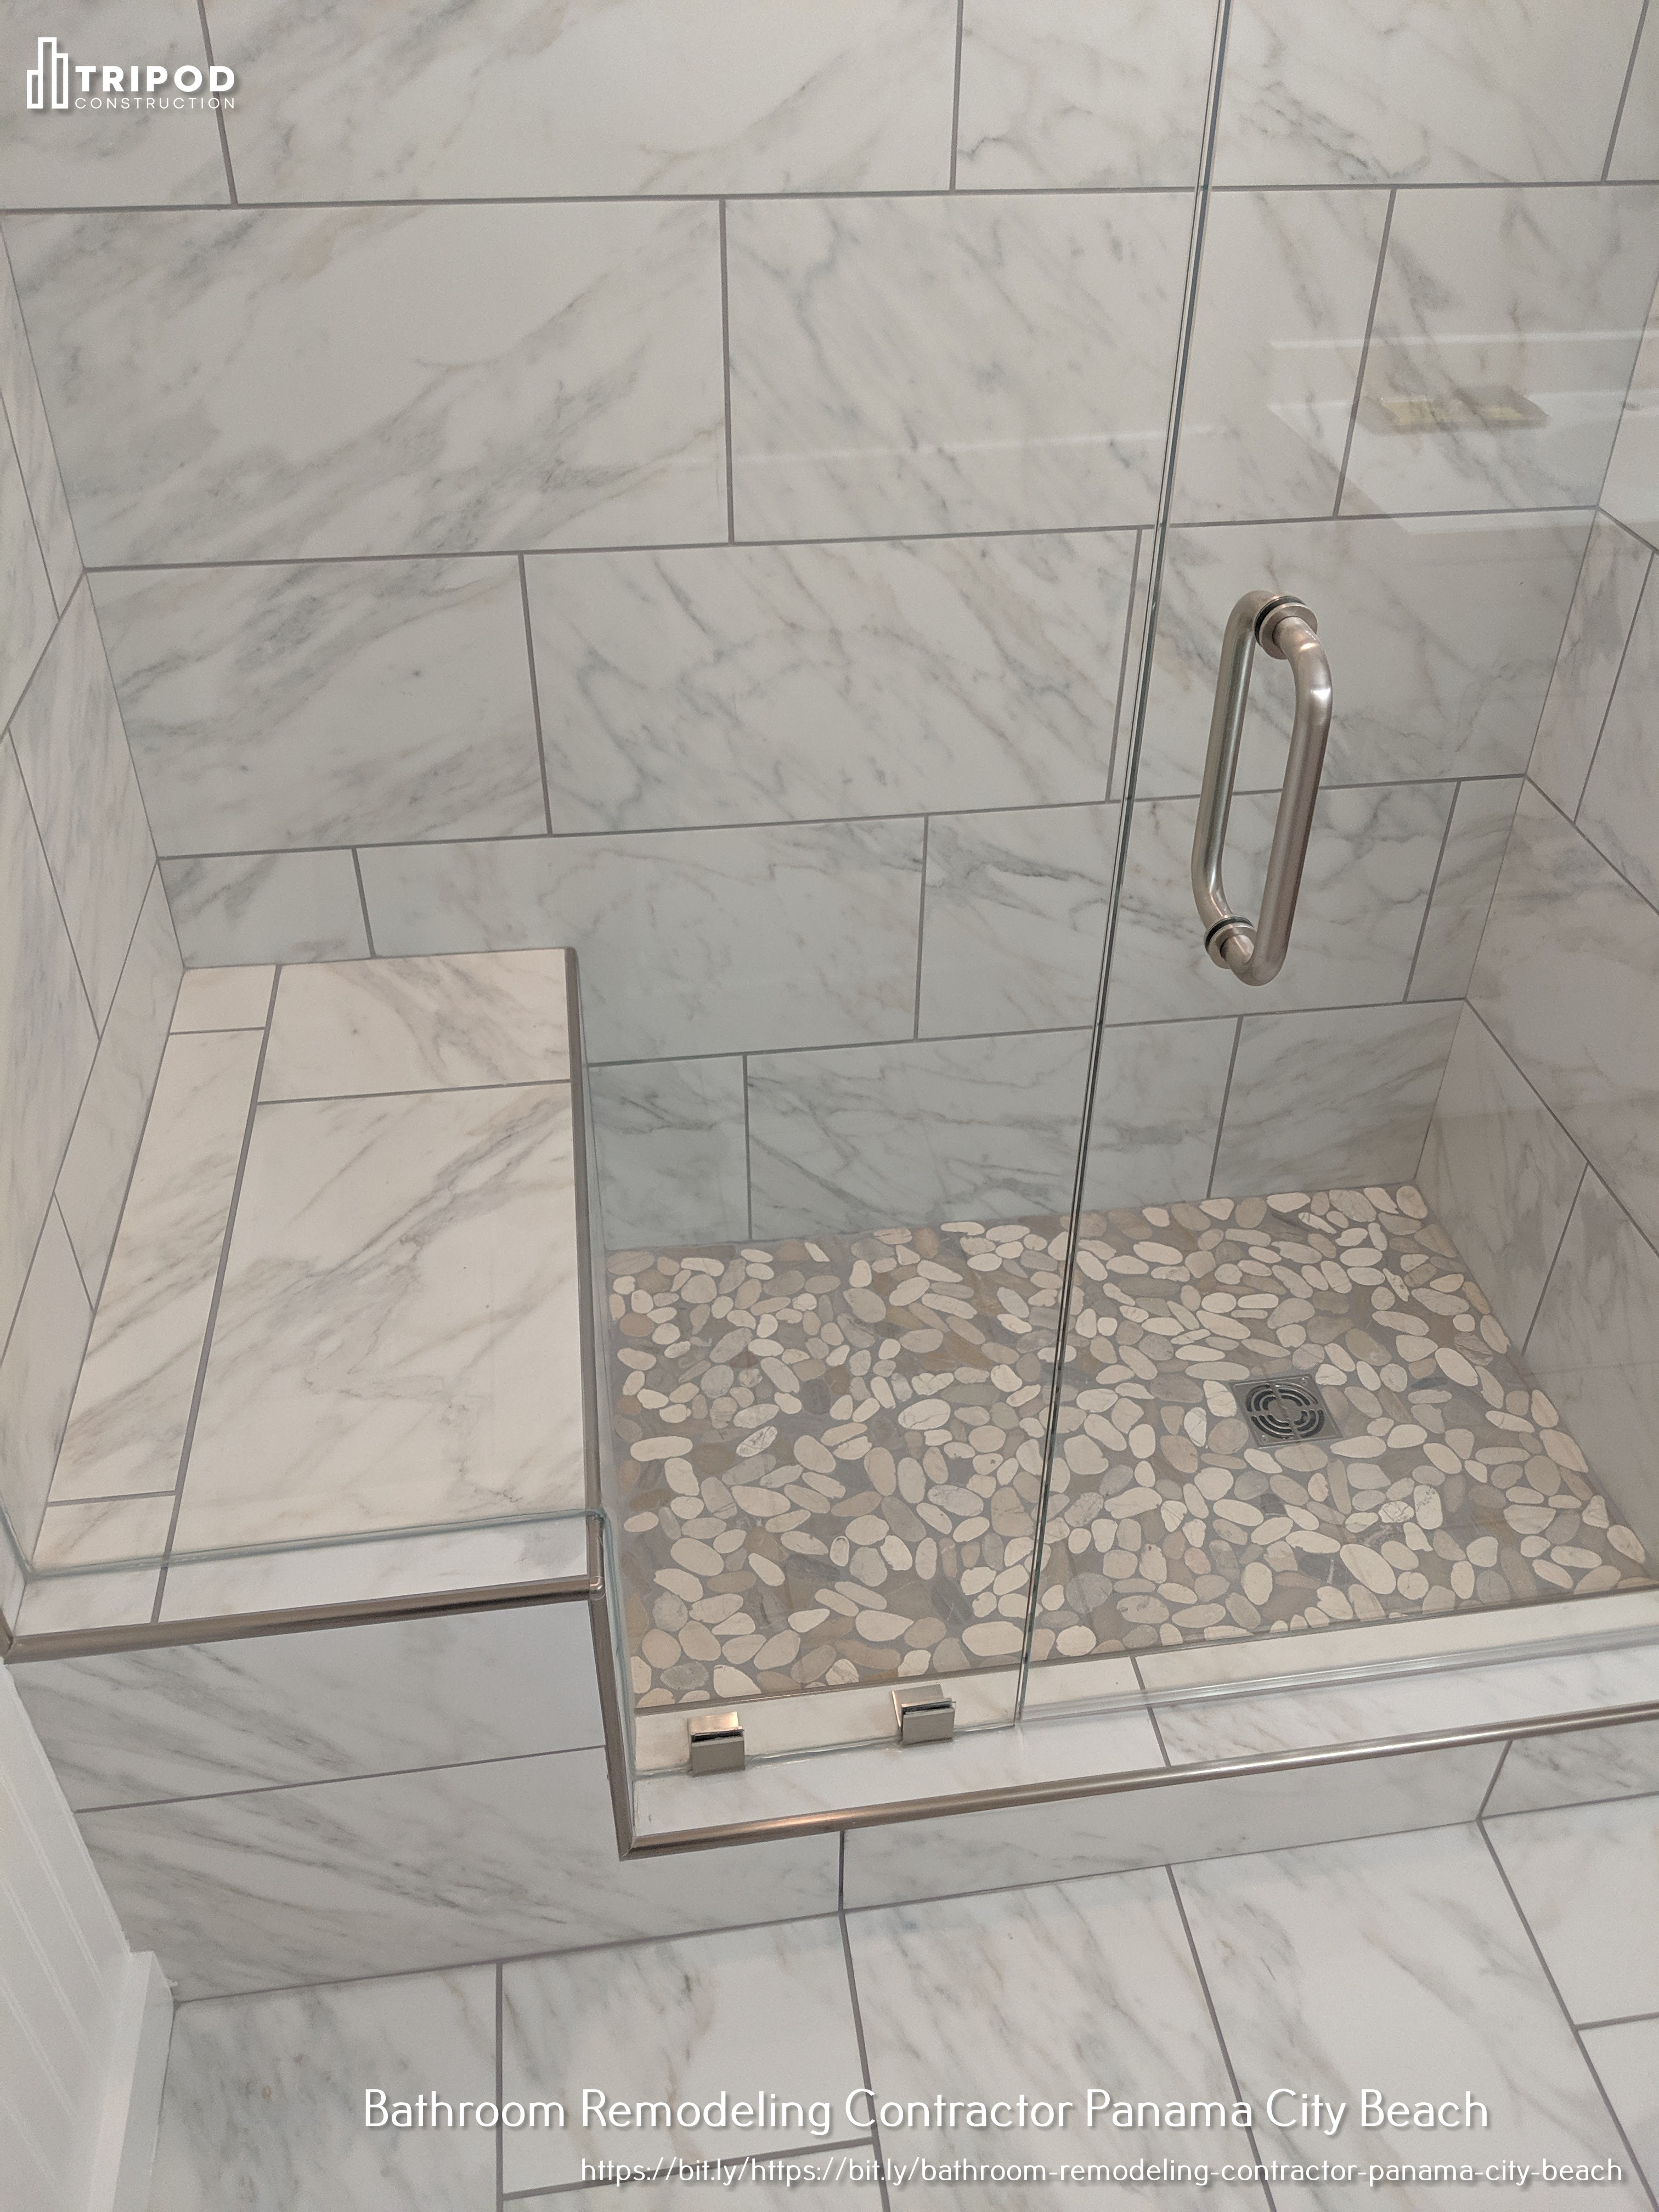 Tripod Construction LLC Outlines the Importance of Professional Bathroom Remodeling